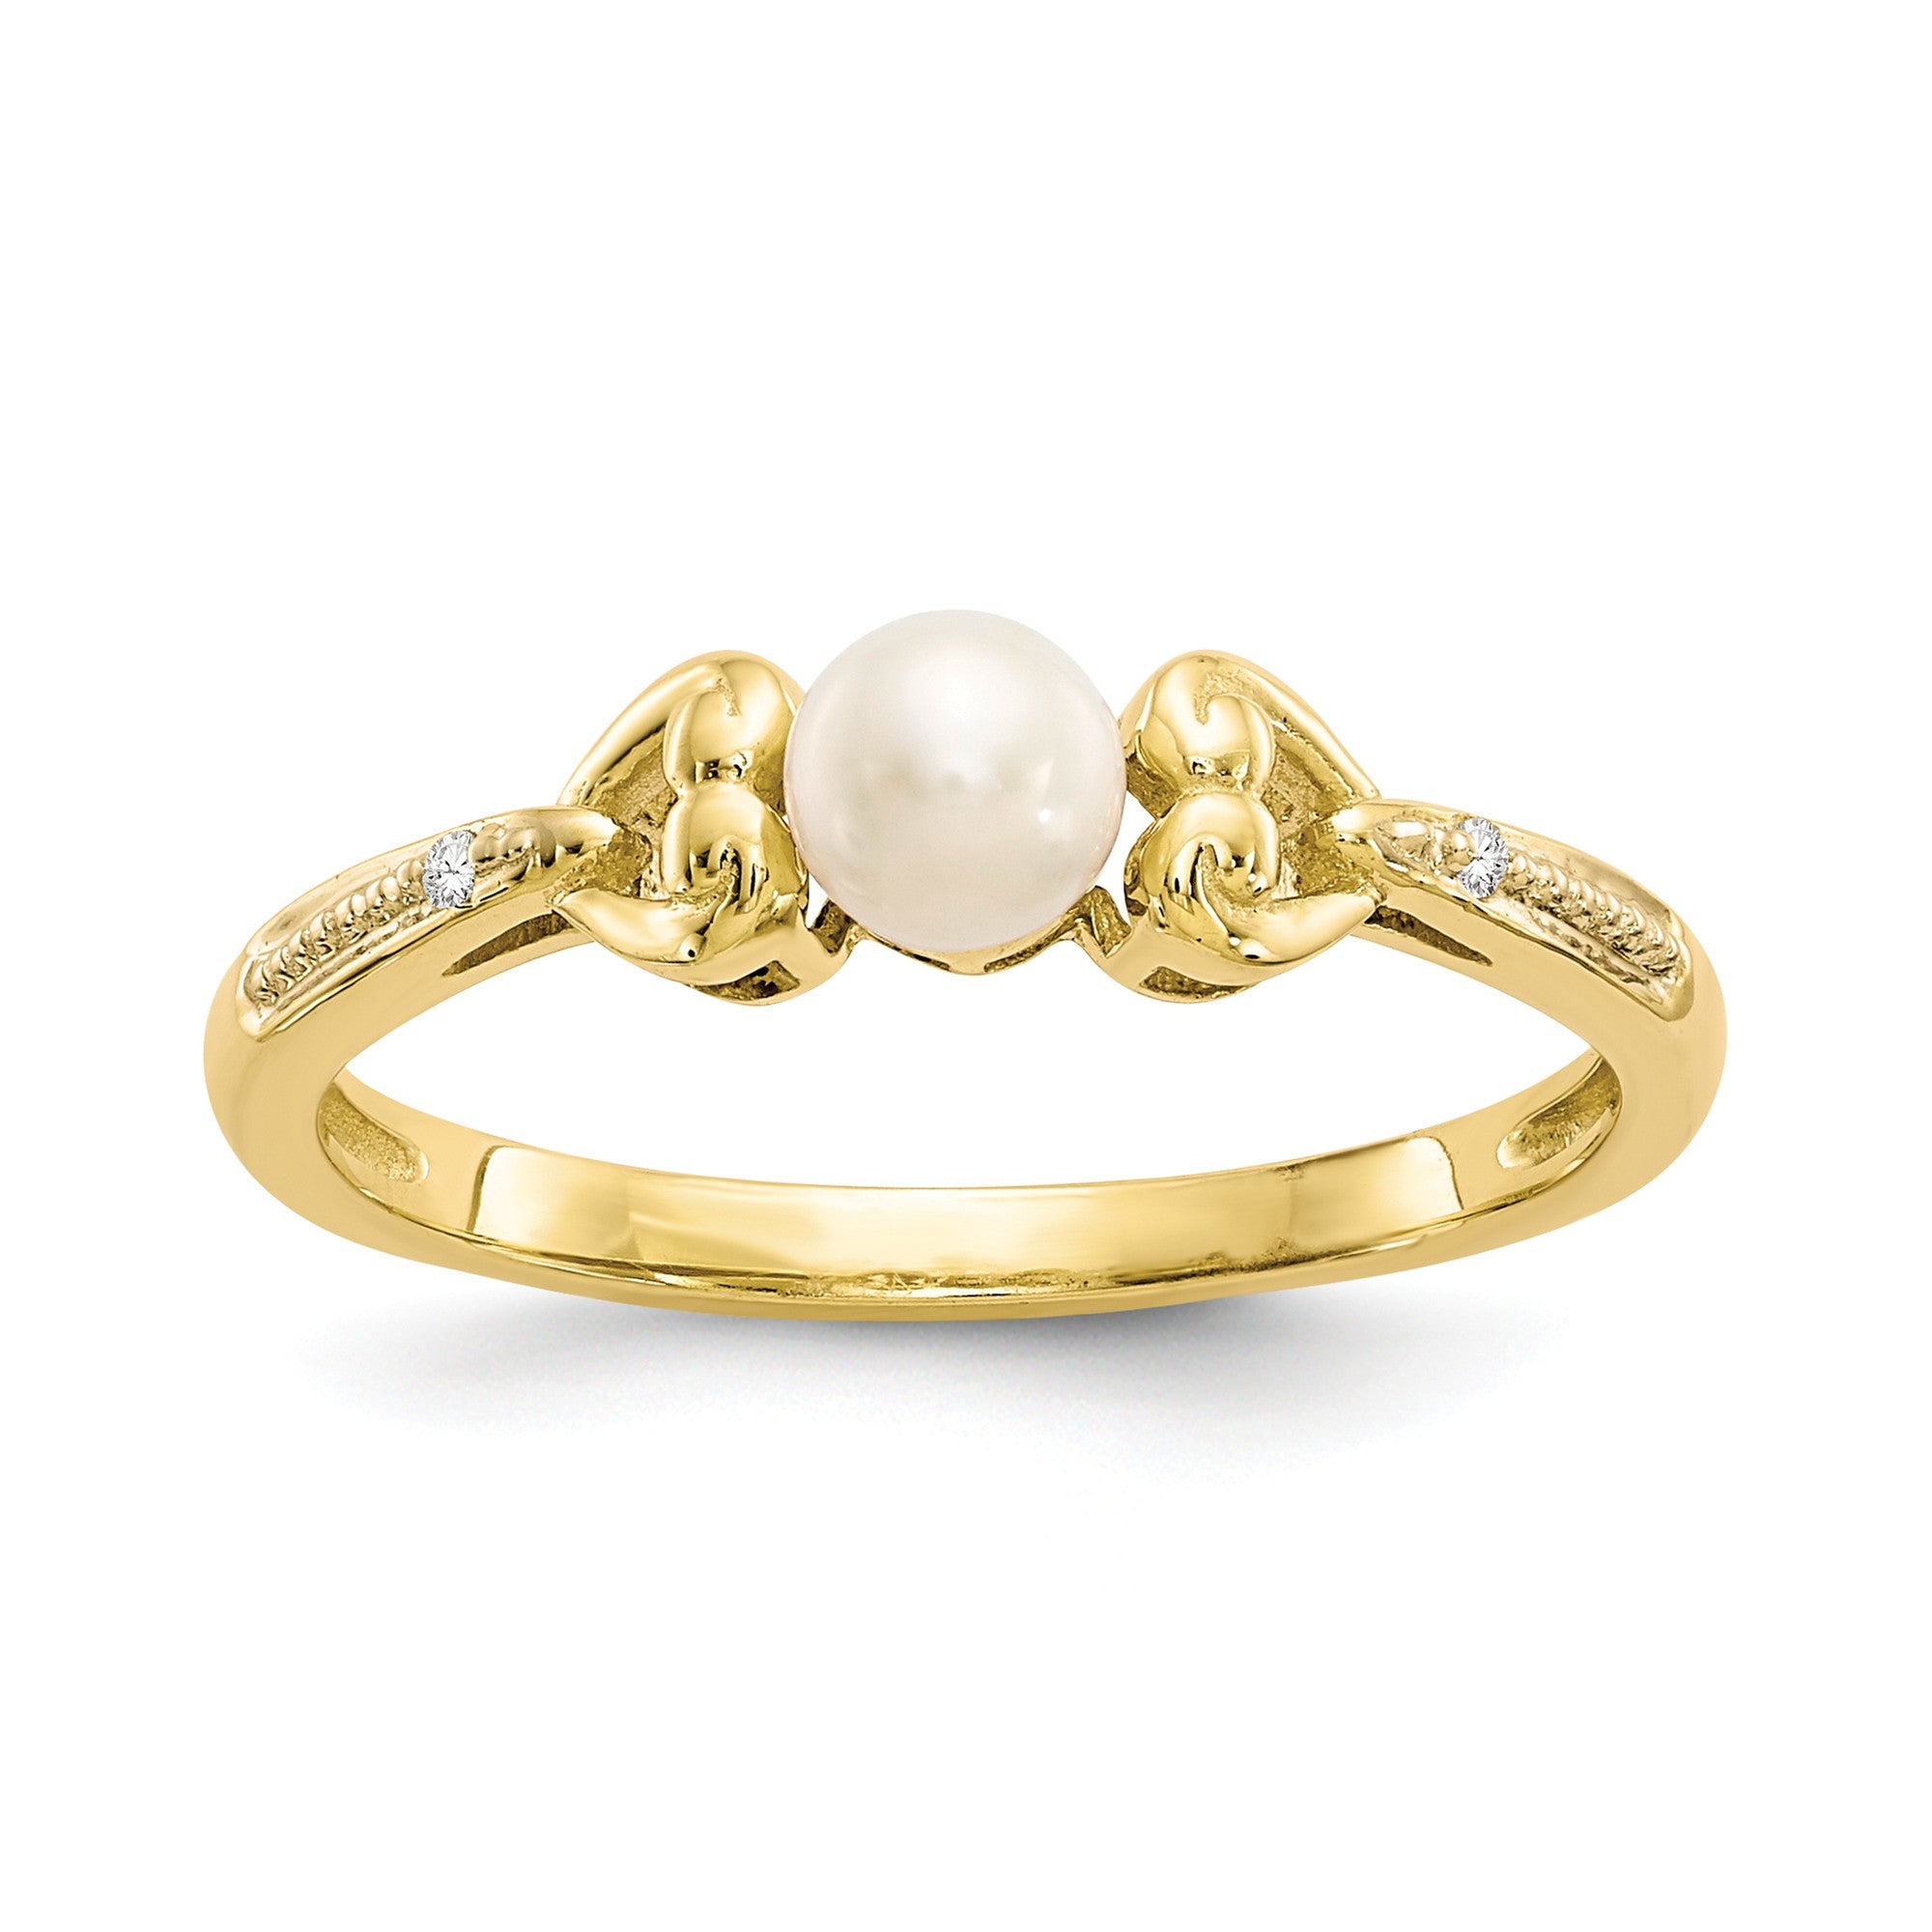 Image of ID 1 10K Yellow Gold FW Cultured Pearl Diamond Ring